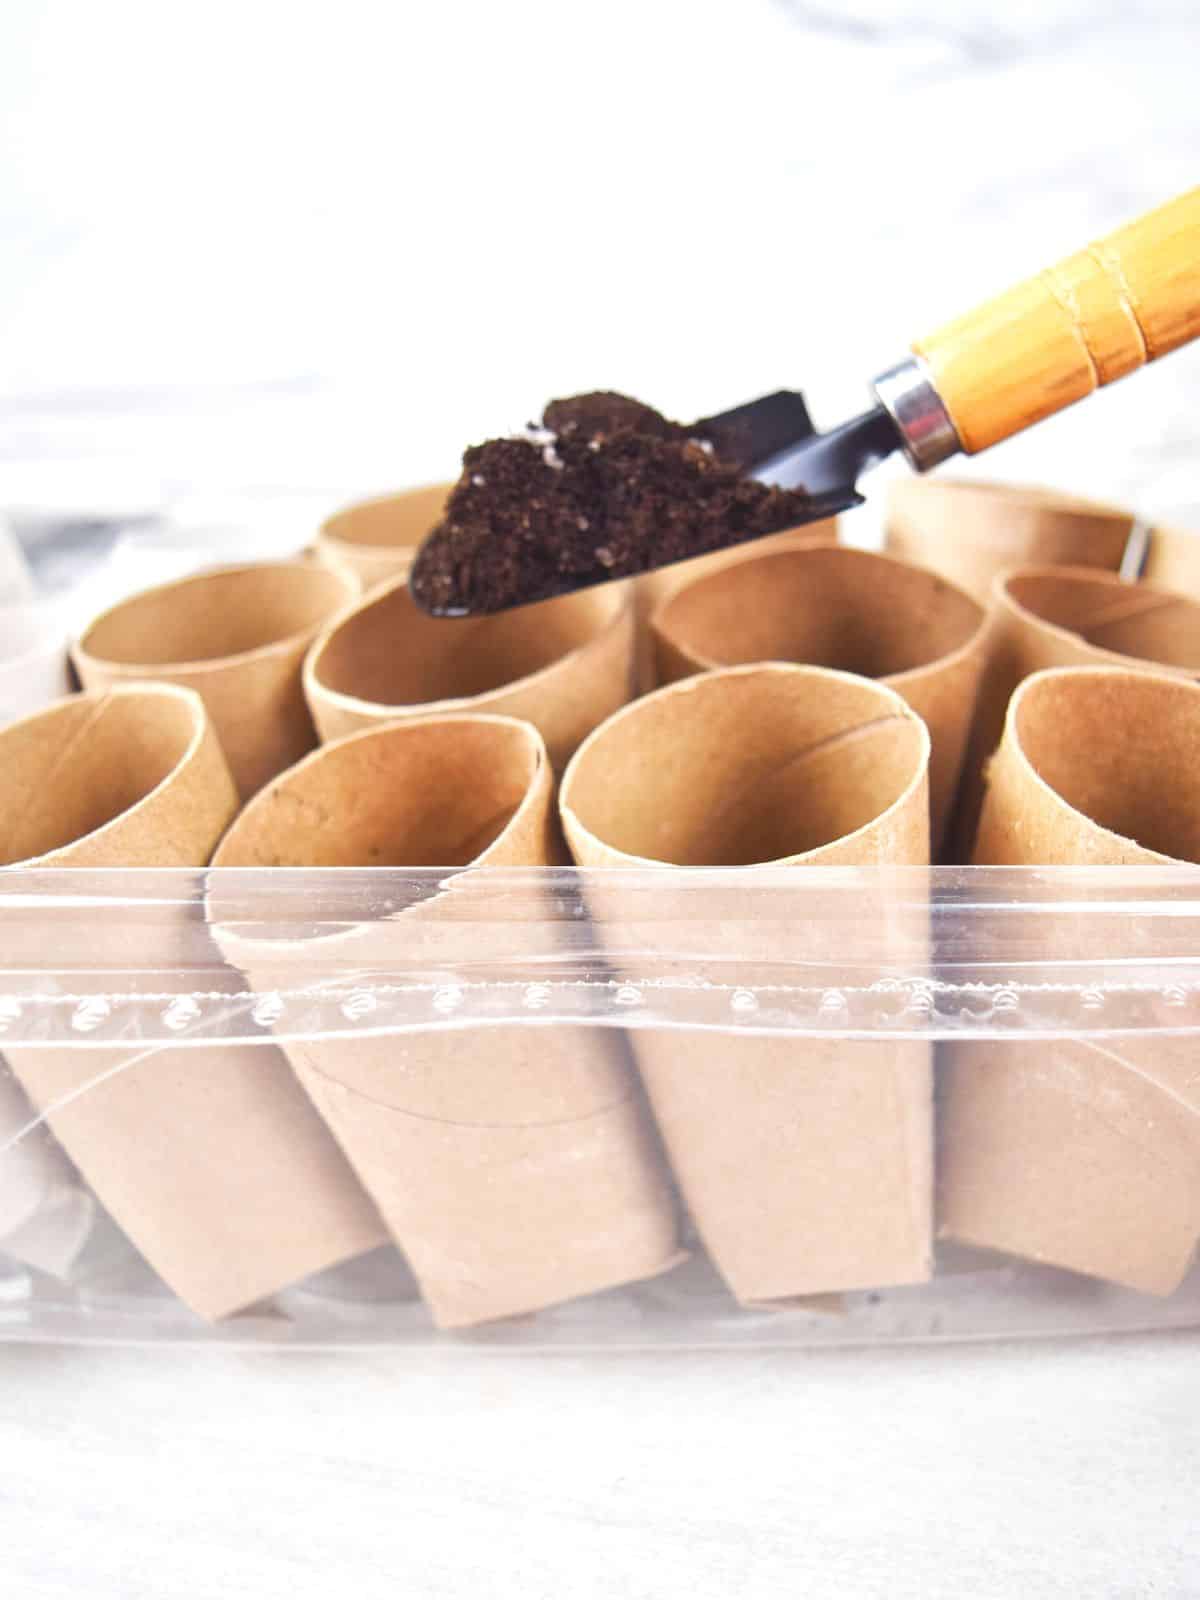 filling paper tubes with soil